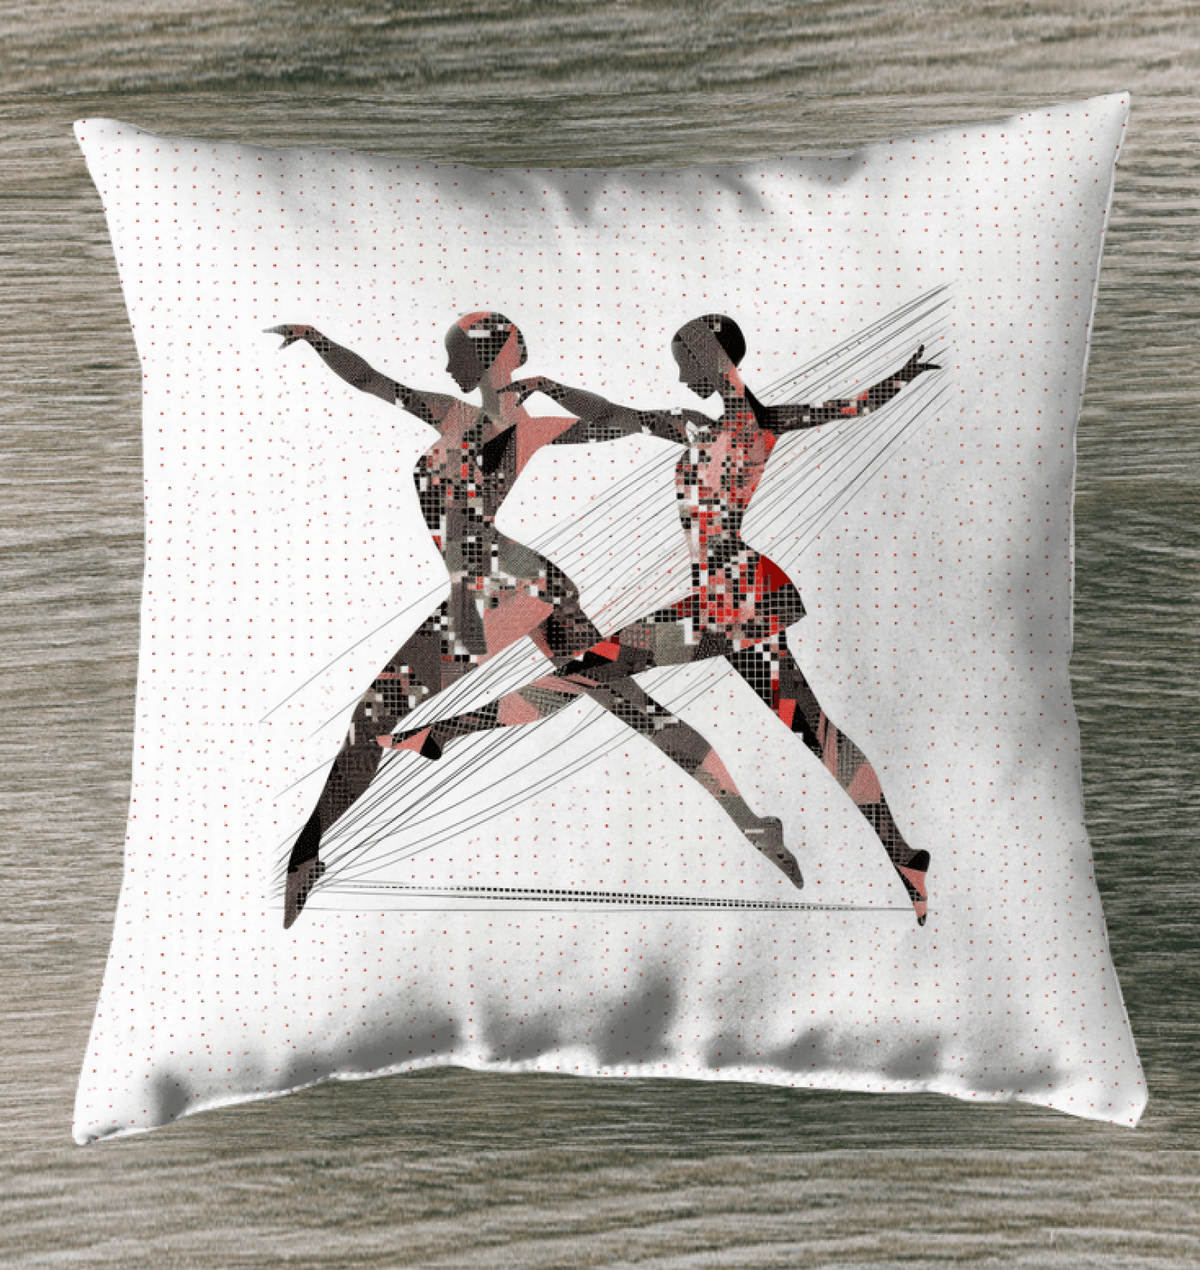 Bold Women's Dance Expression colorful indoor pillow on a cozy couch.